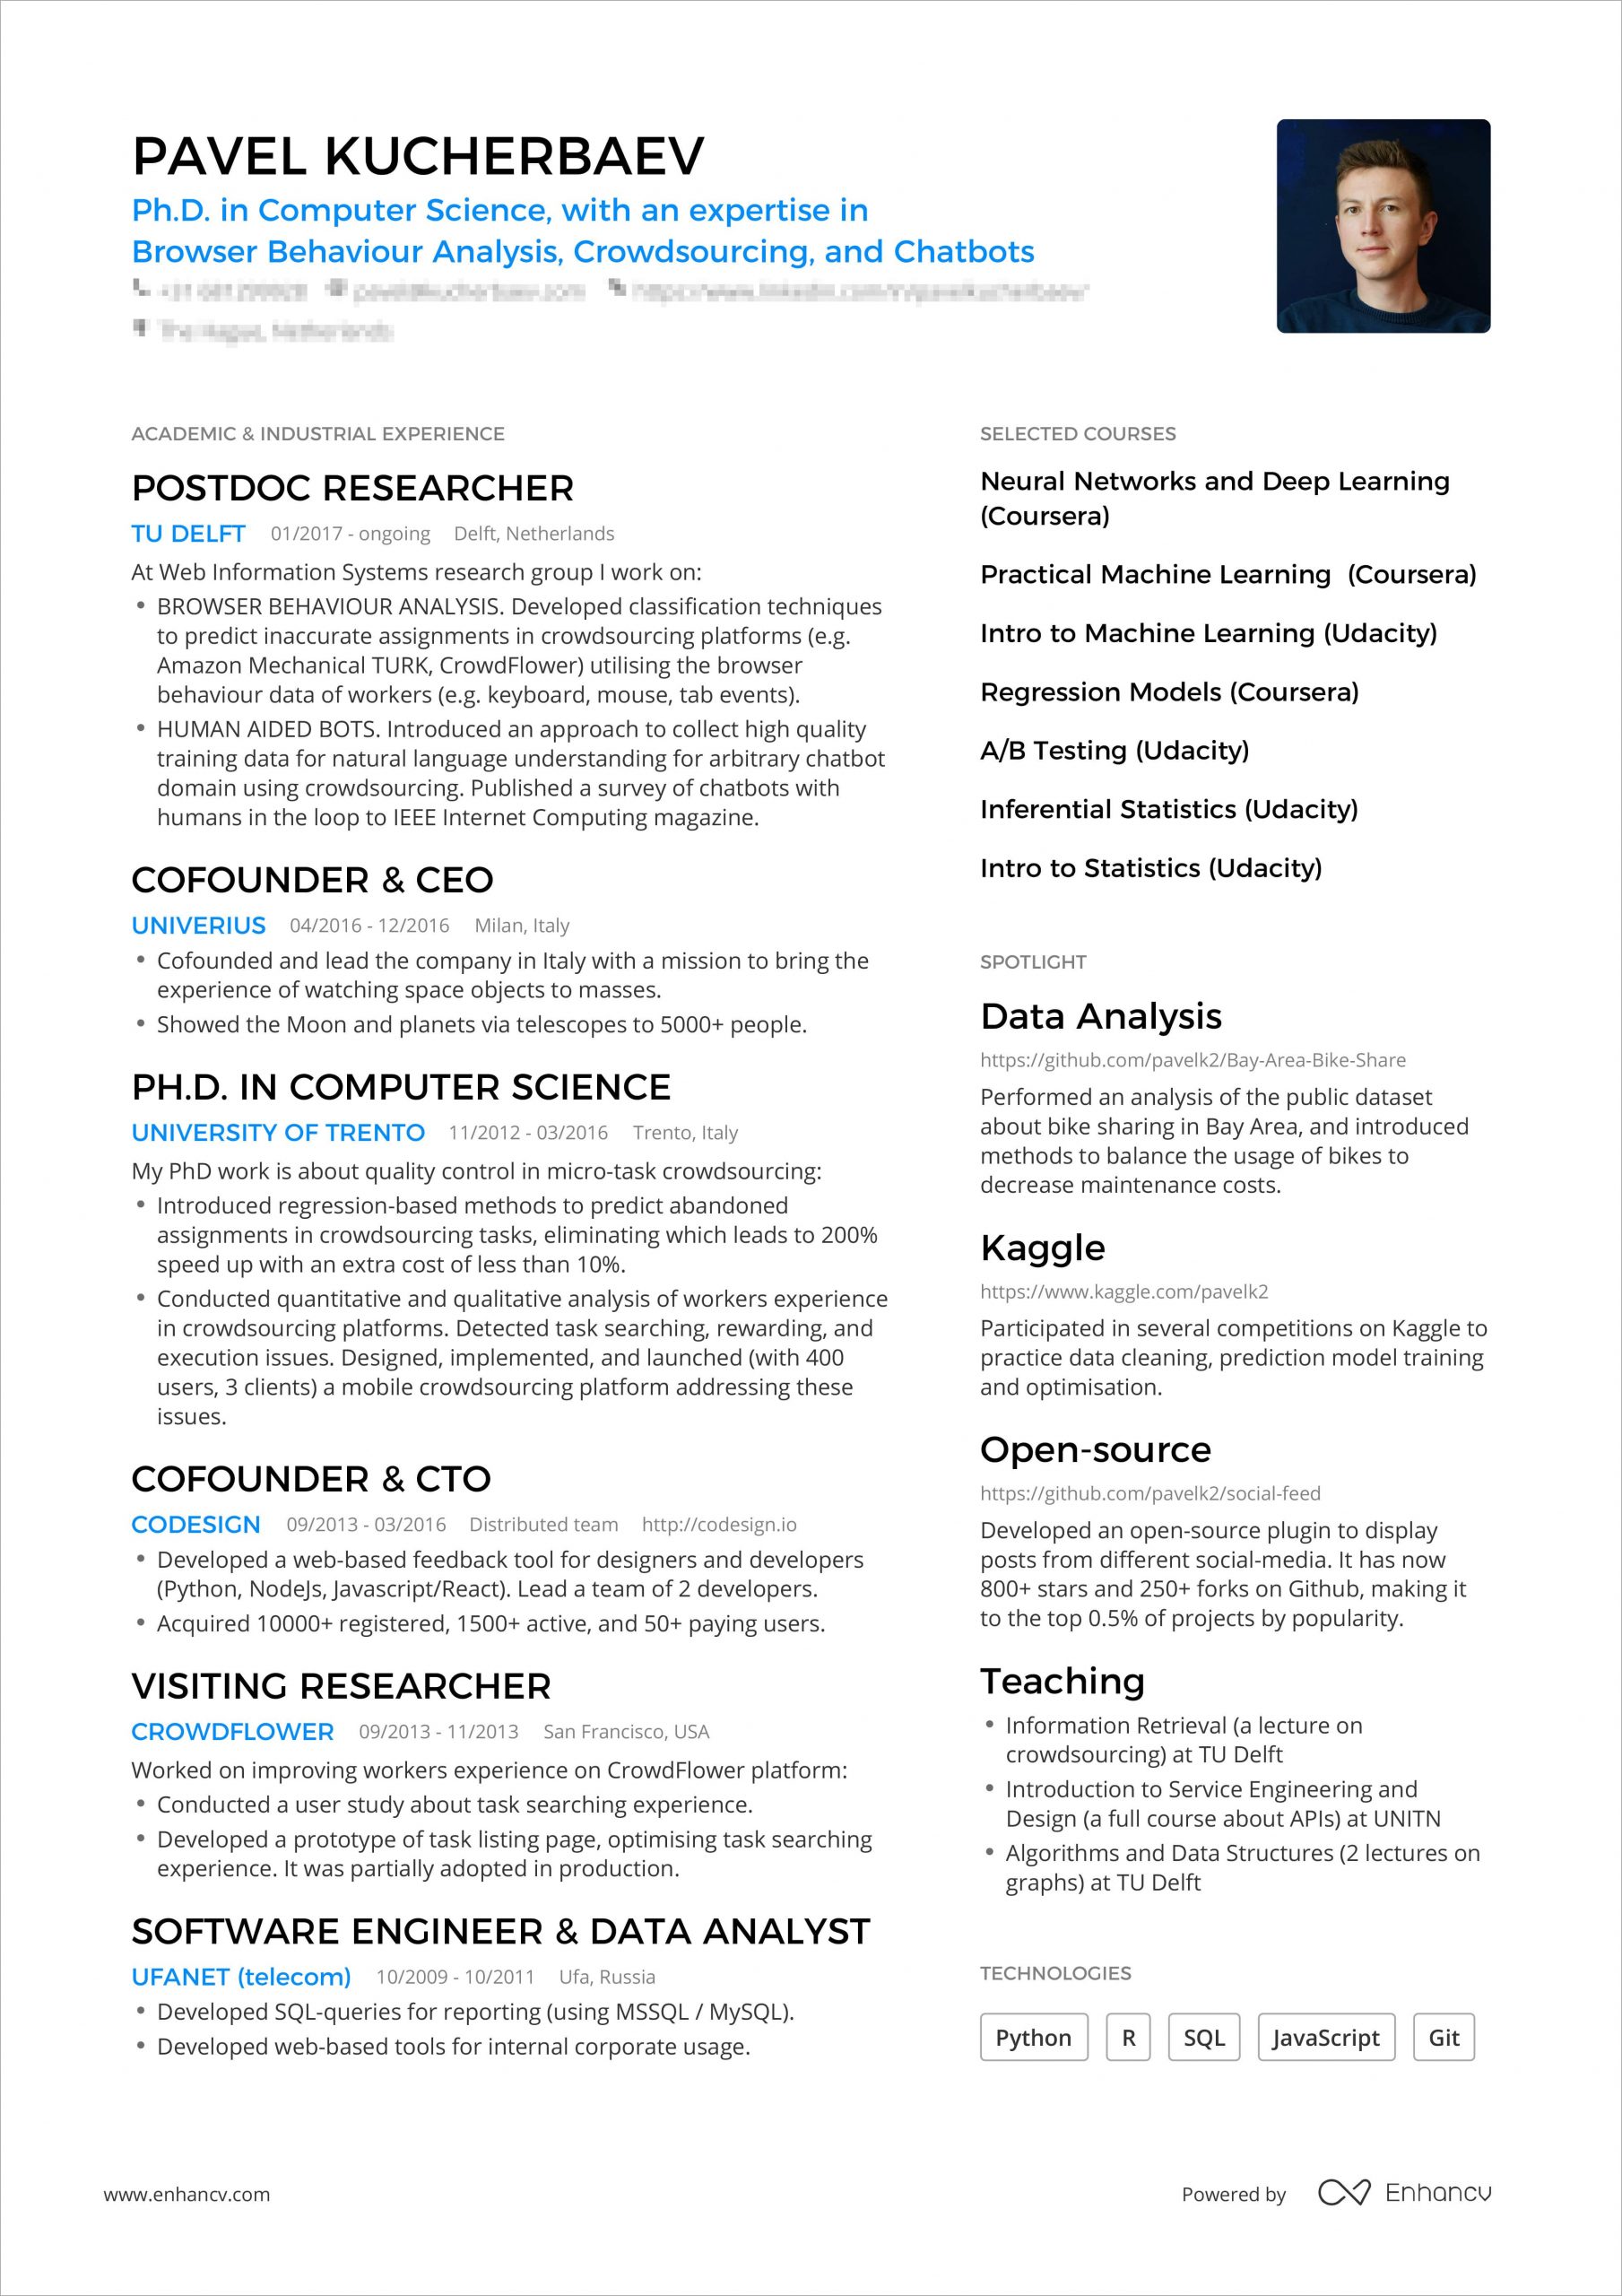 Sample Resume with Only One Job One Page Resume: Examples & Guide for 2021